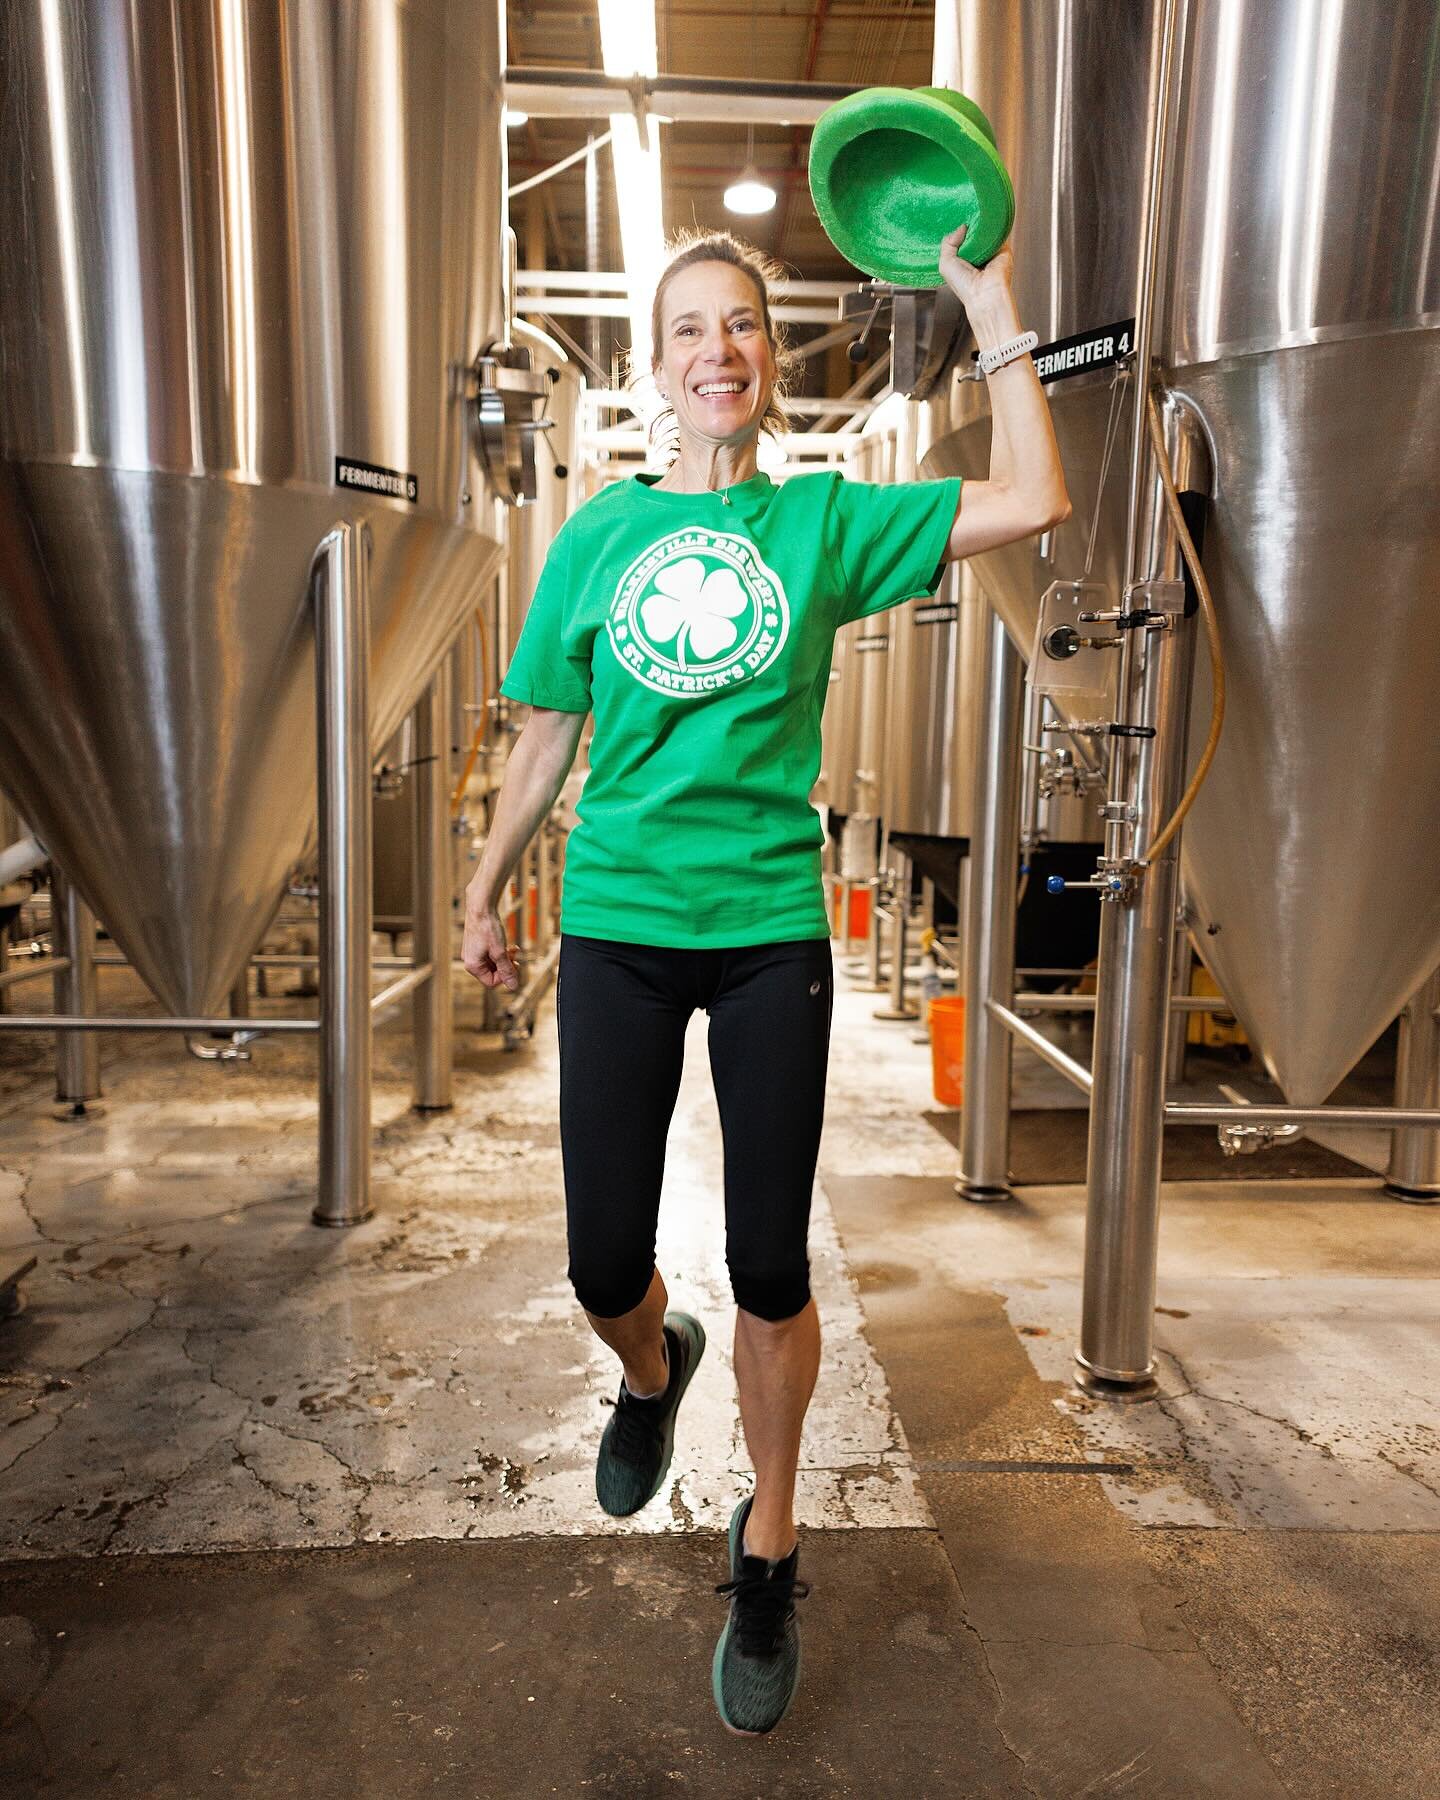 Looking to get a little St. Patrick&rsquo;s Day &lsquo;practice&rsquo; in this year? Well you&rsquo;re in LUCK! 🍀

Get festive and deck yourself out in your finest green at our St. Practice Day Fun Run/Walk for a good cause! Join us at the brewery o